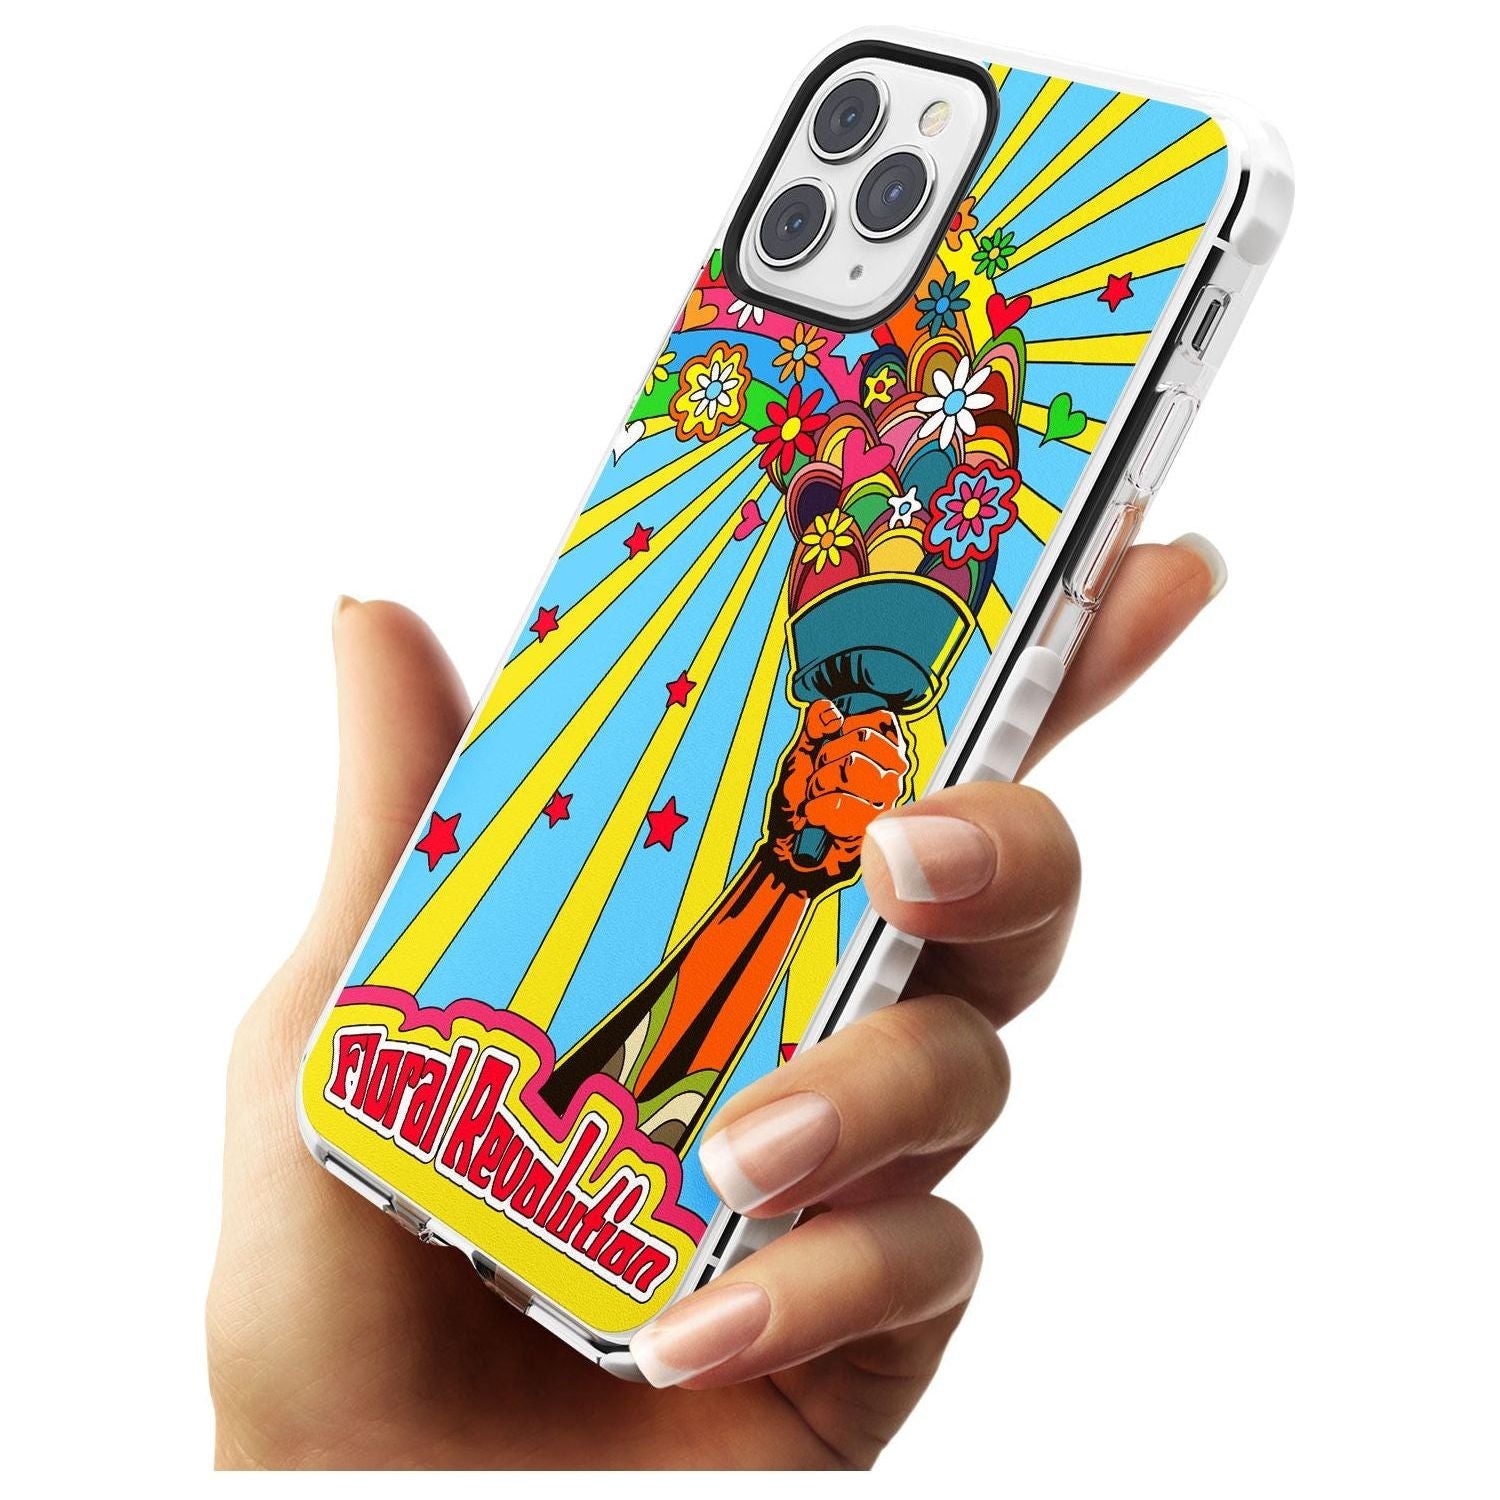 Floral Revolution Slim TPU Phone Case for iPhone 11 Pro Max